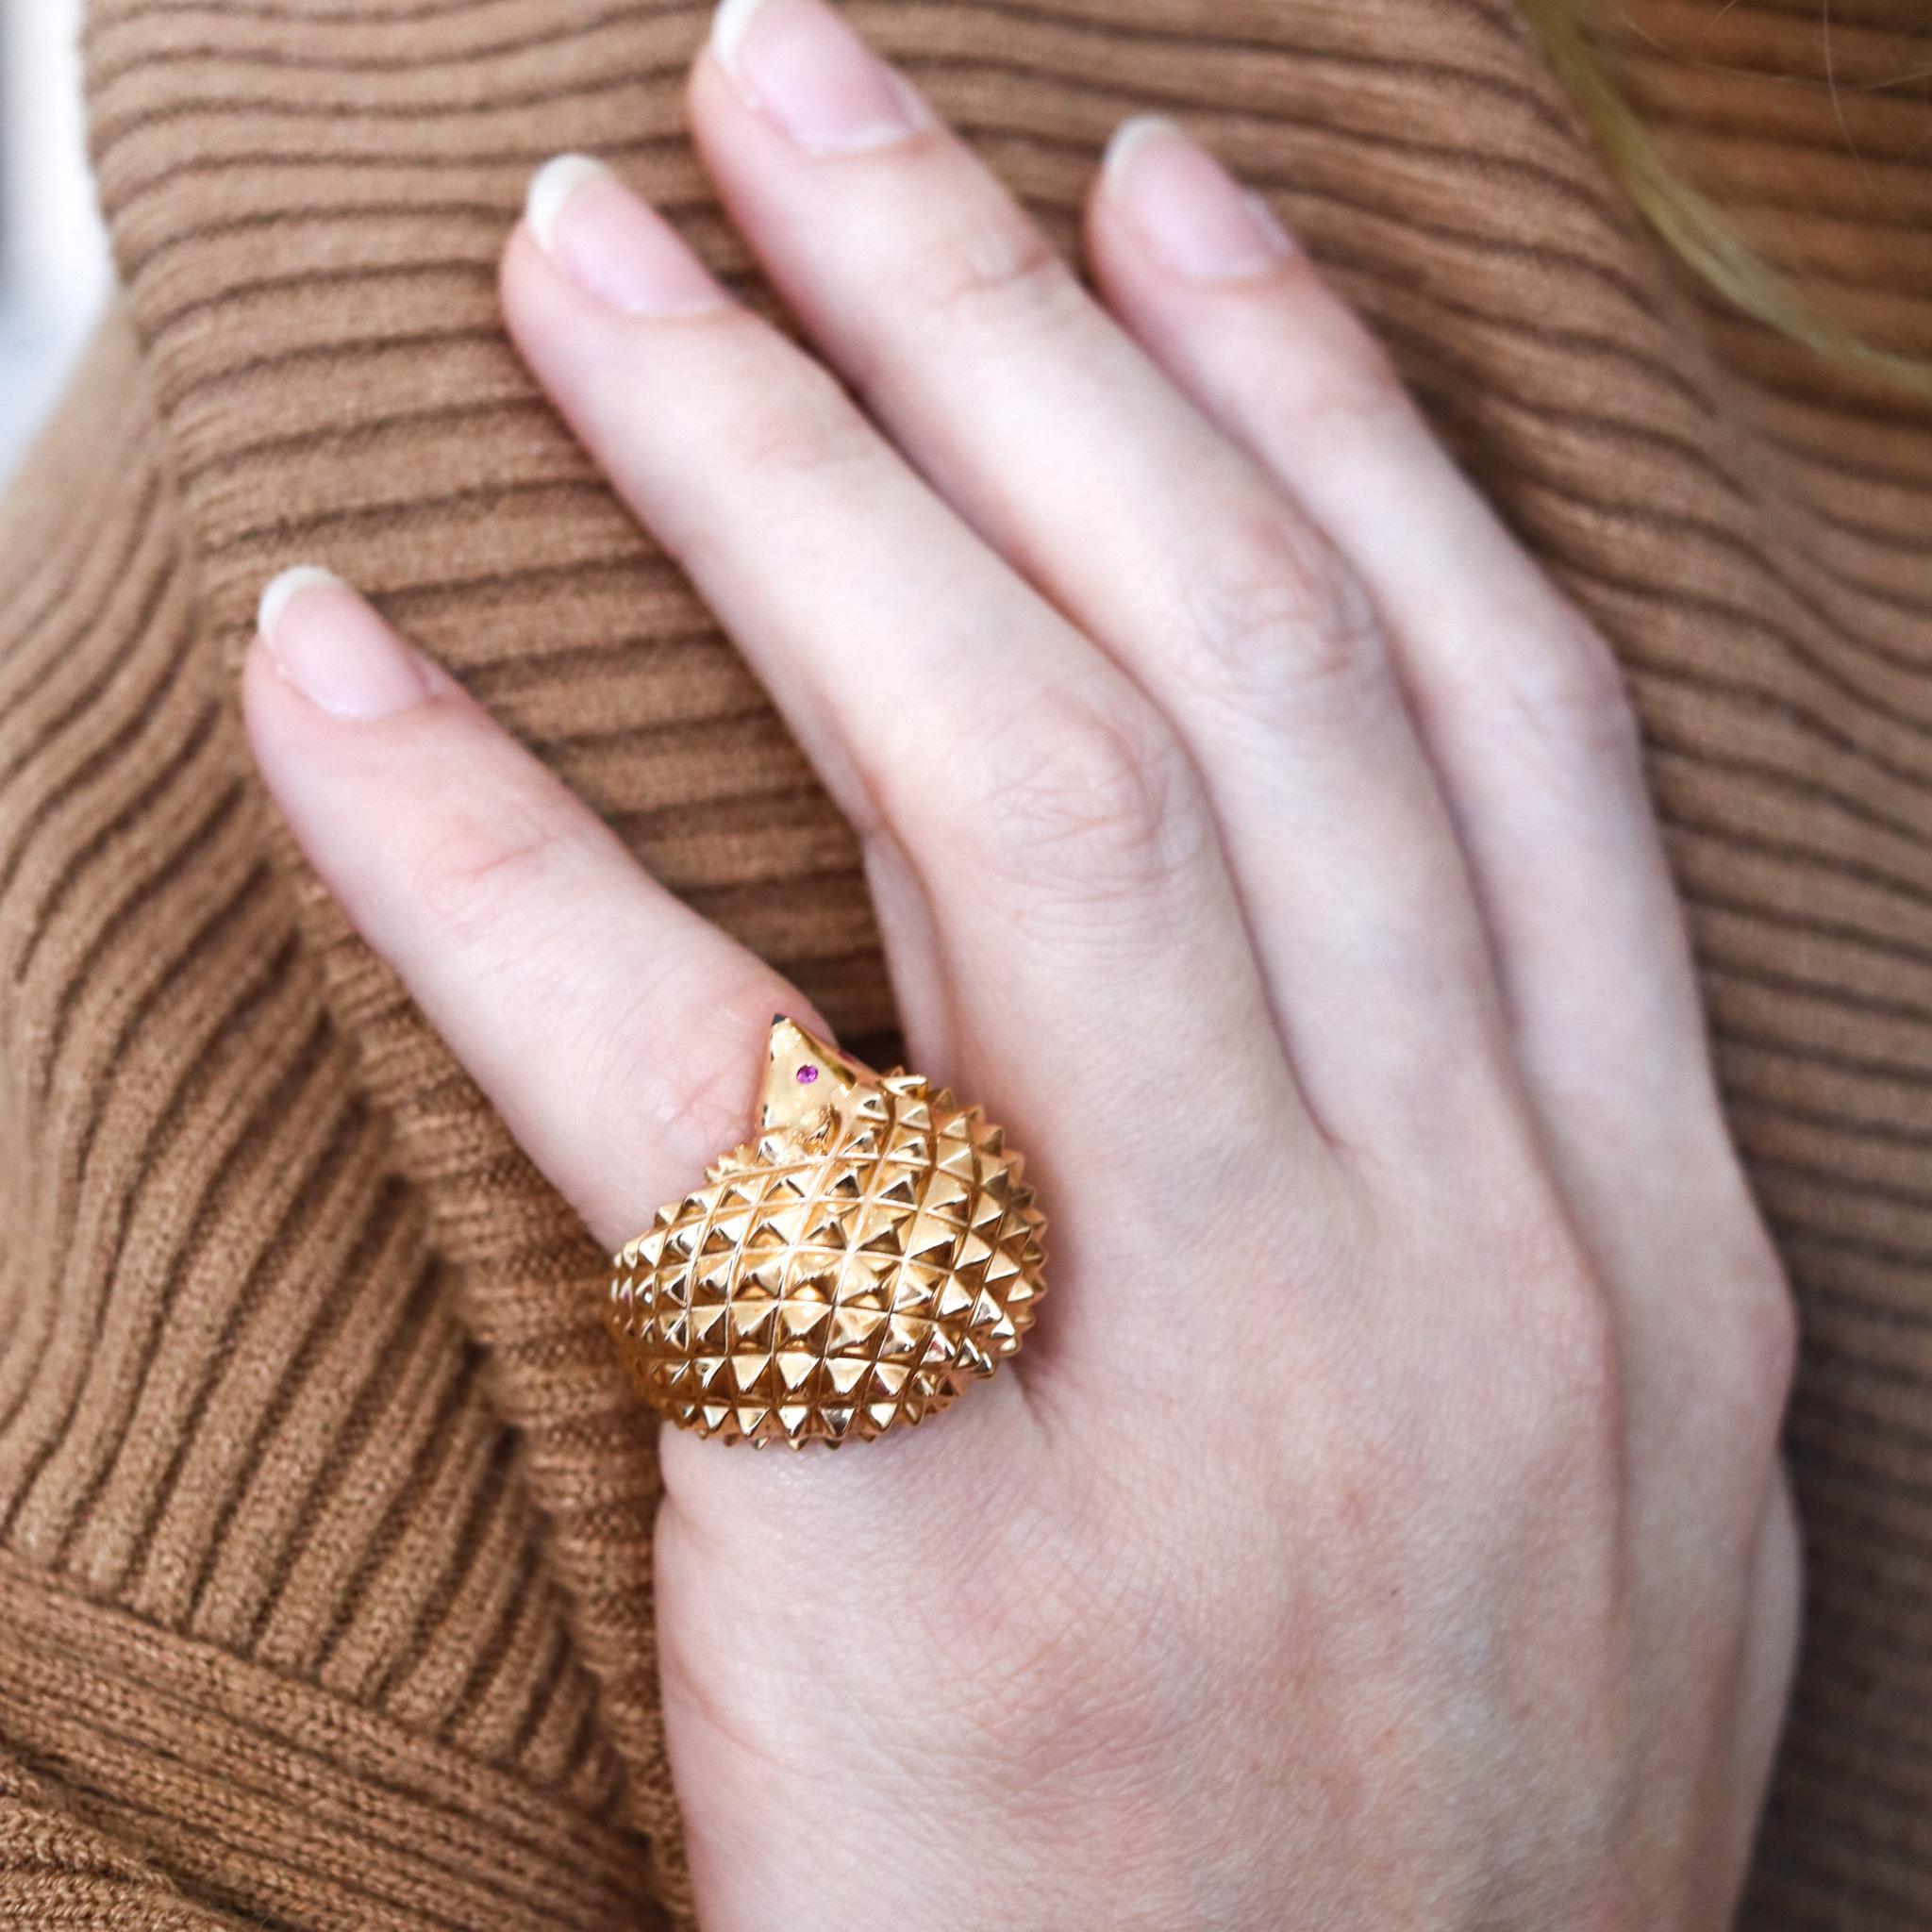 Women's Boucheron Paris Textured Porcupine Ring in 18Kt Yellow Gold with Two Rubies